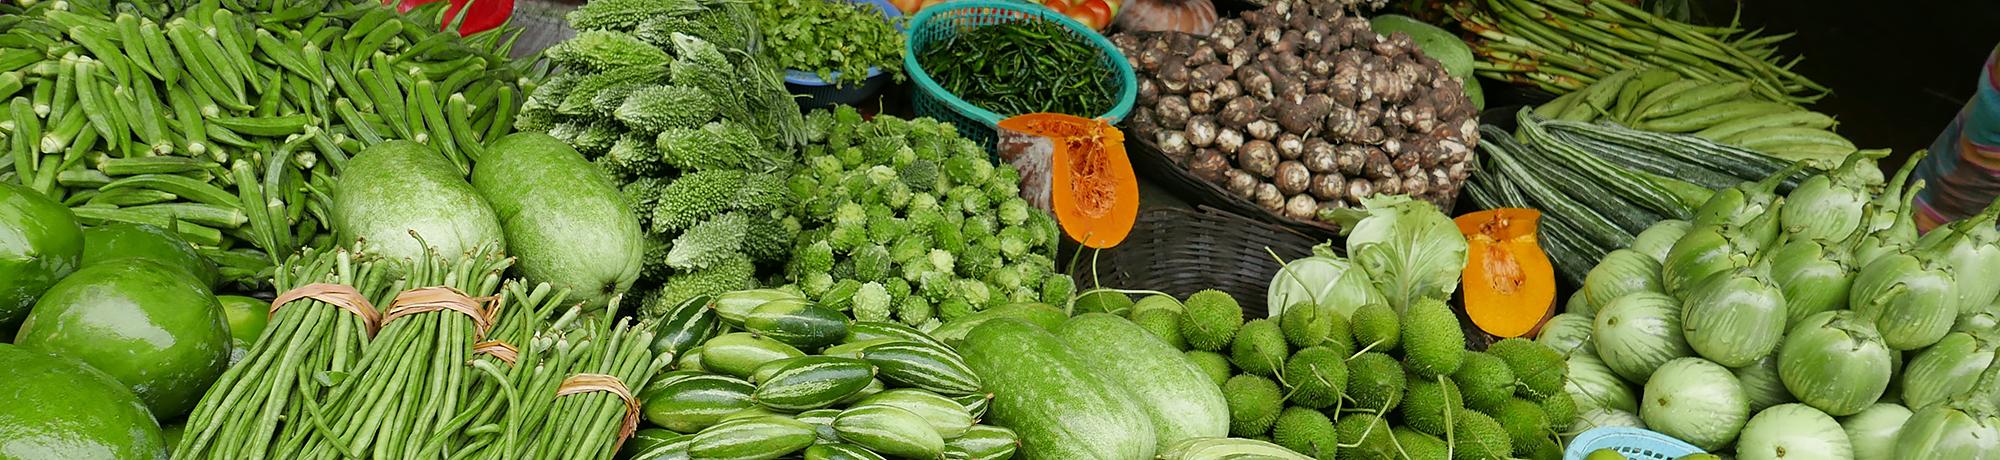 Fresh vegetables at a market in Bangaldesh, long beans, eggplant, squash, peppers, okra, bittermelon, herbs, root vegetables, cabbage, melons